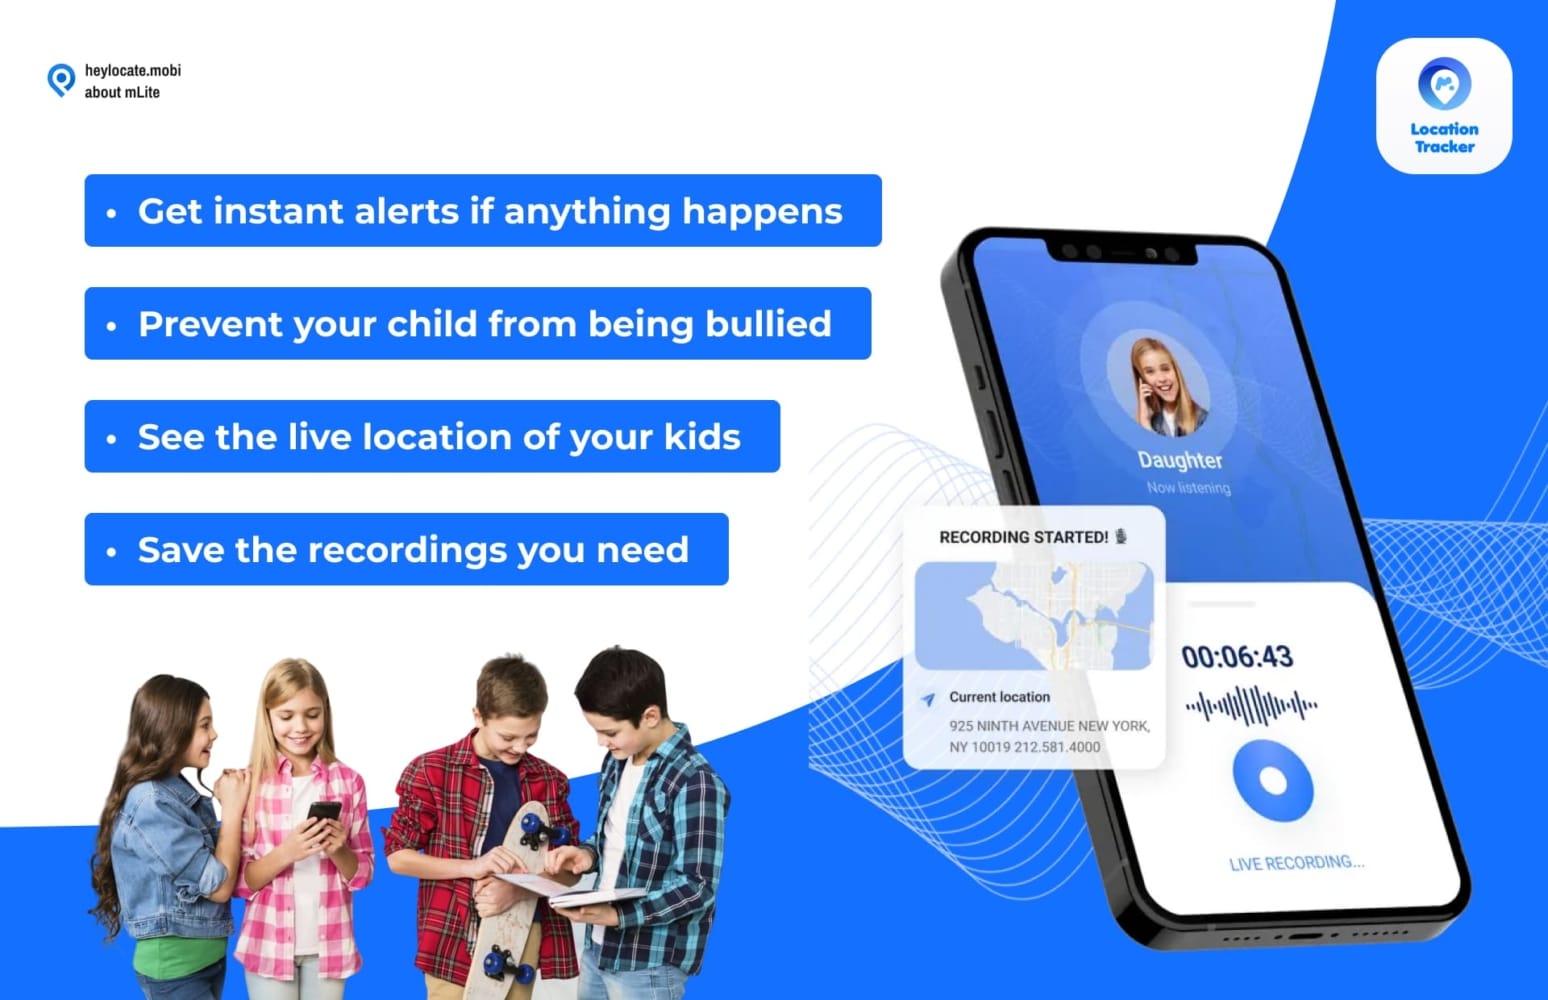 An advertisement for a mobile tracking app featuring benefits such as instant alerts, bullying prevention, live location tracking, and recording saving, alongside an image of children using a smartphone and a graphical representation of the app interface showing a live location and recording feature.